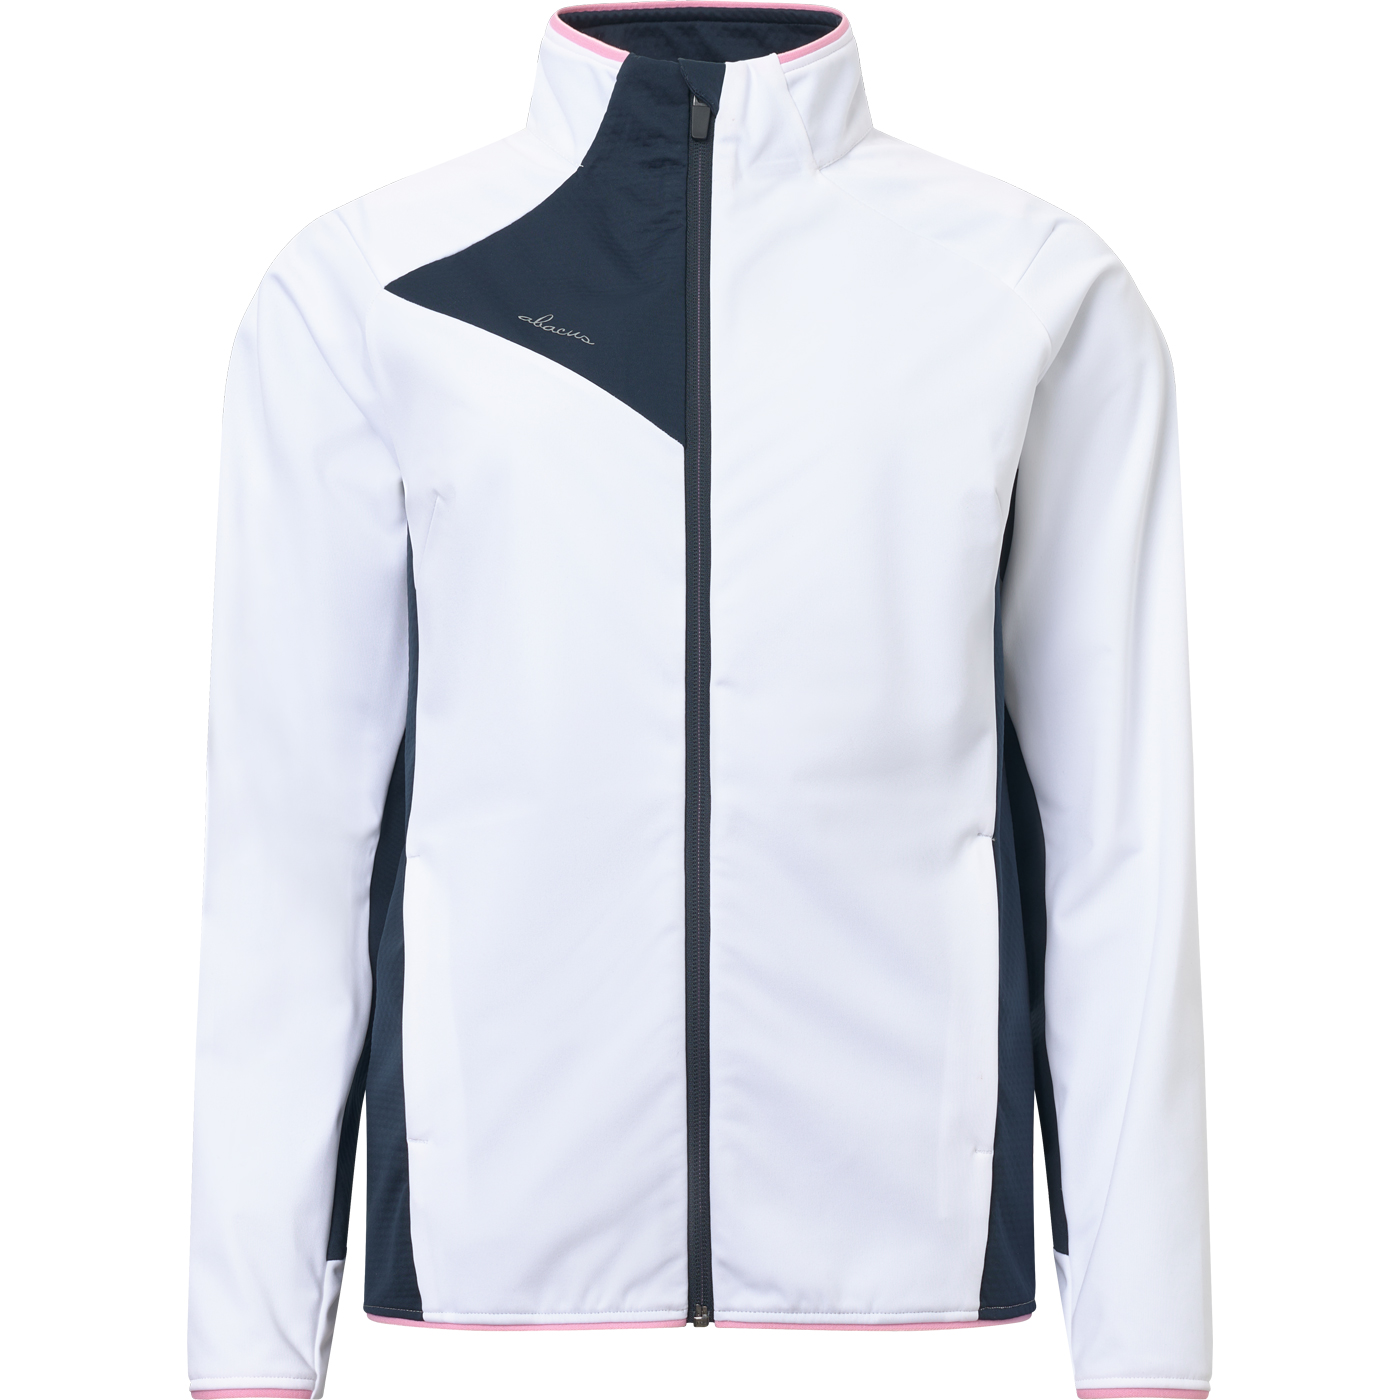 Lds Ardfin softshell jacket - white/navy in the group WOMEN / All clothing at Abacus Sportswear (2295193)